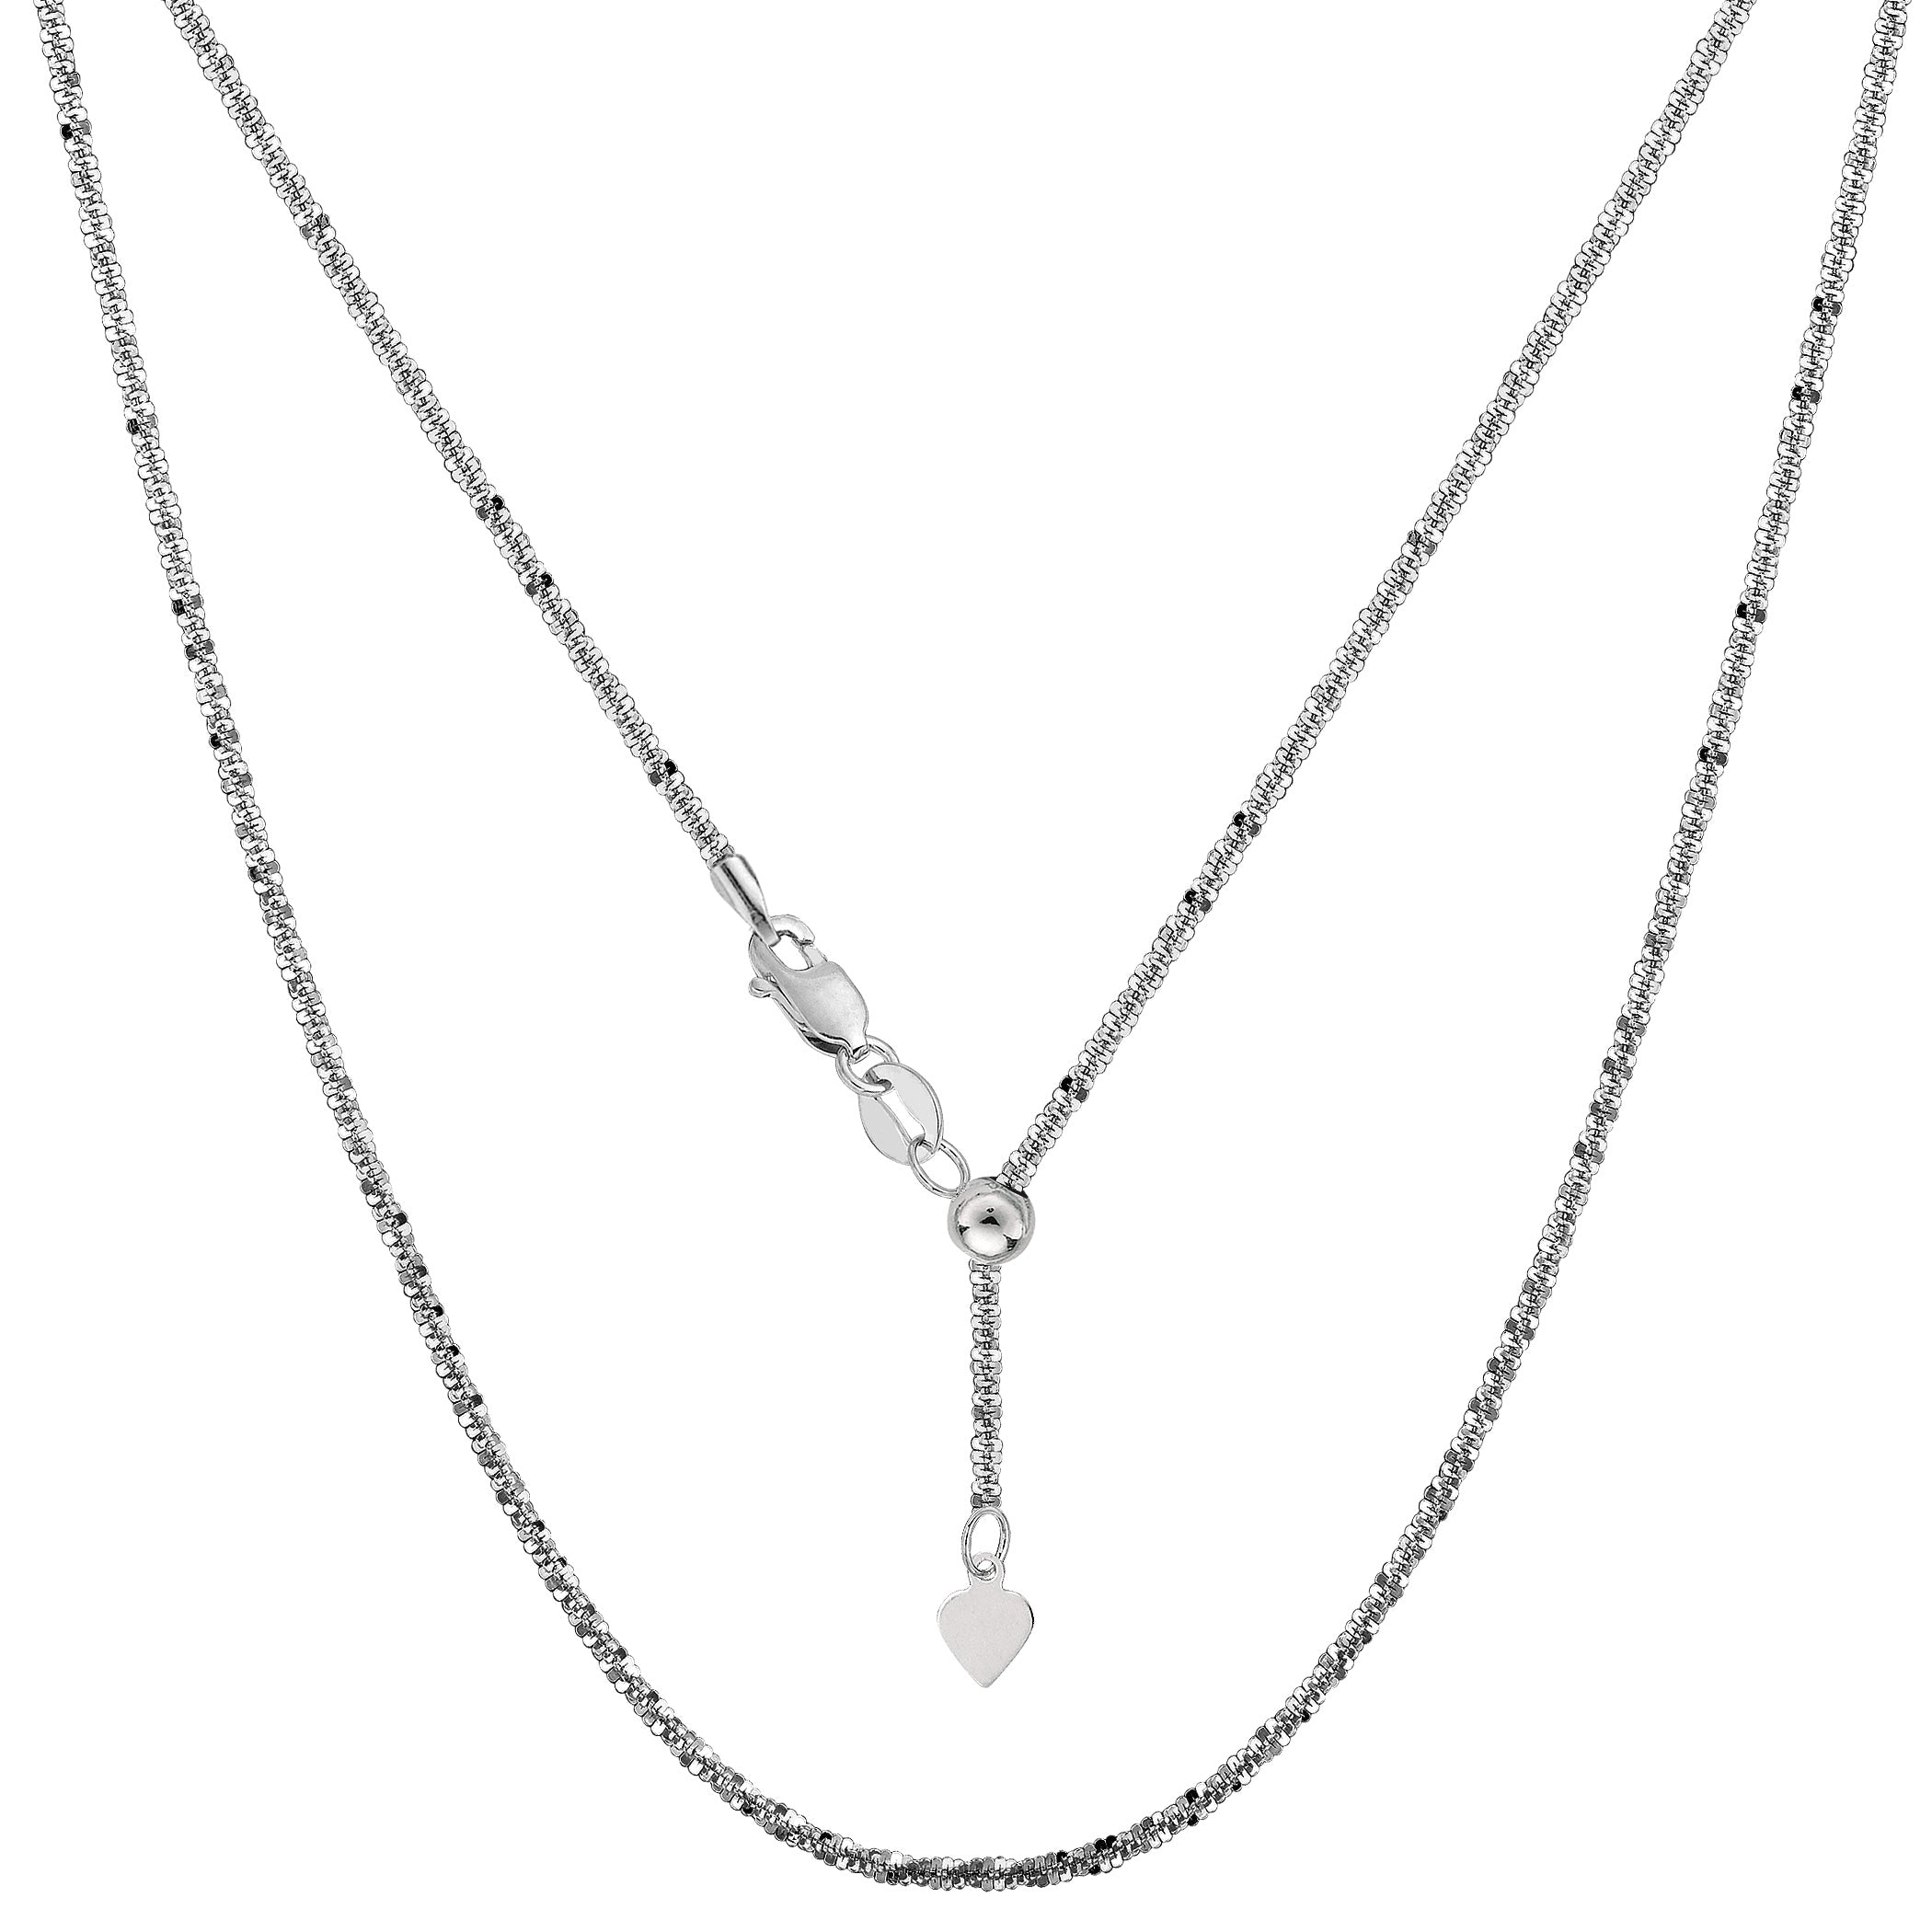 Sterling Silver Rhodium Plated 22" Sliding Adjustable Sparkle Chain Necklace, 1.5mm fine designer jewelry for men and women